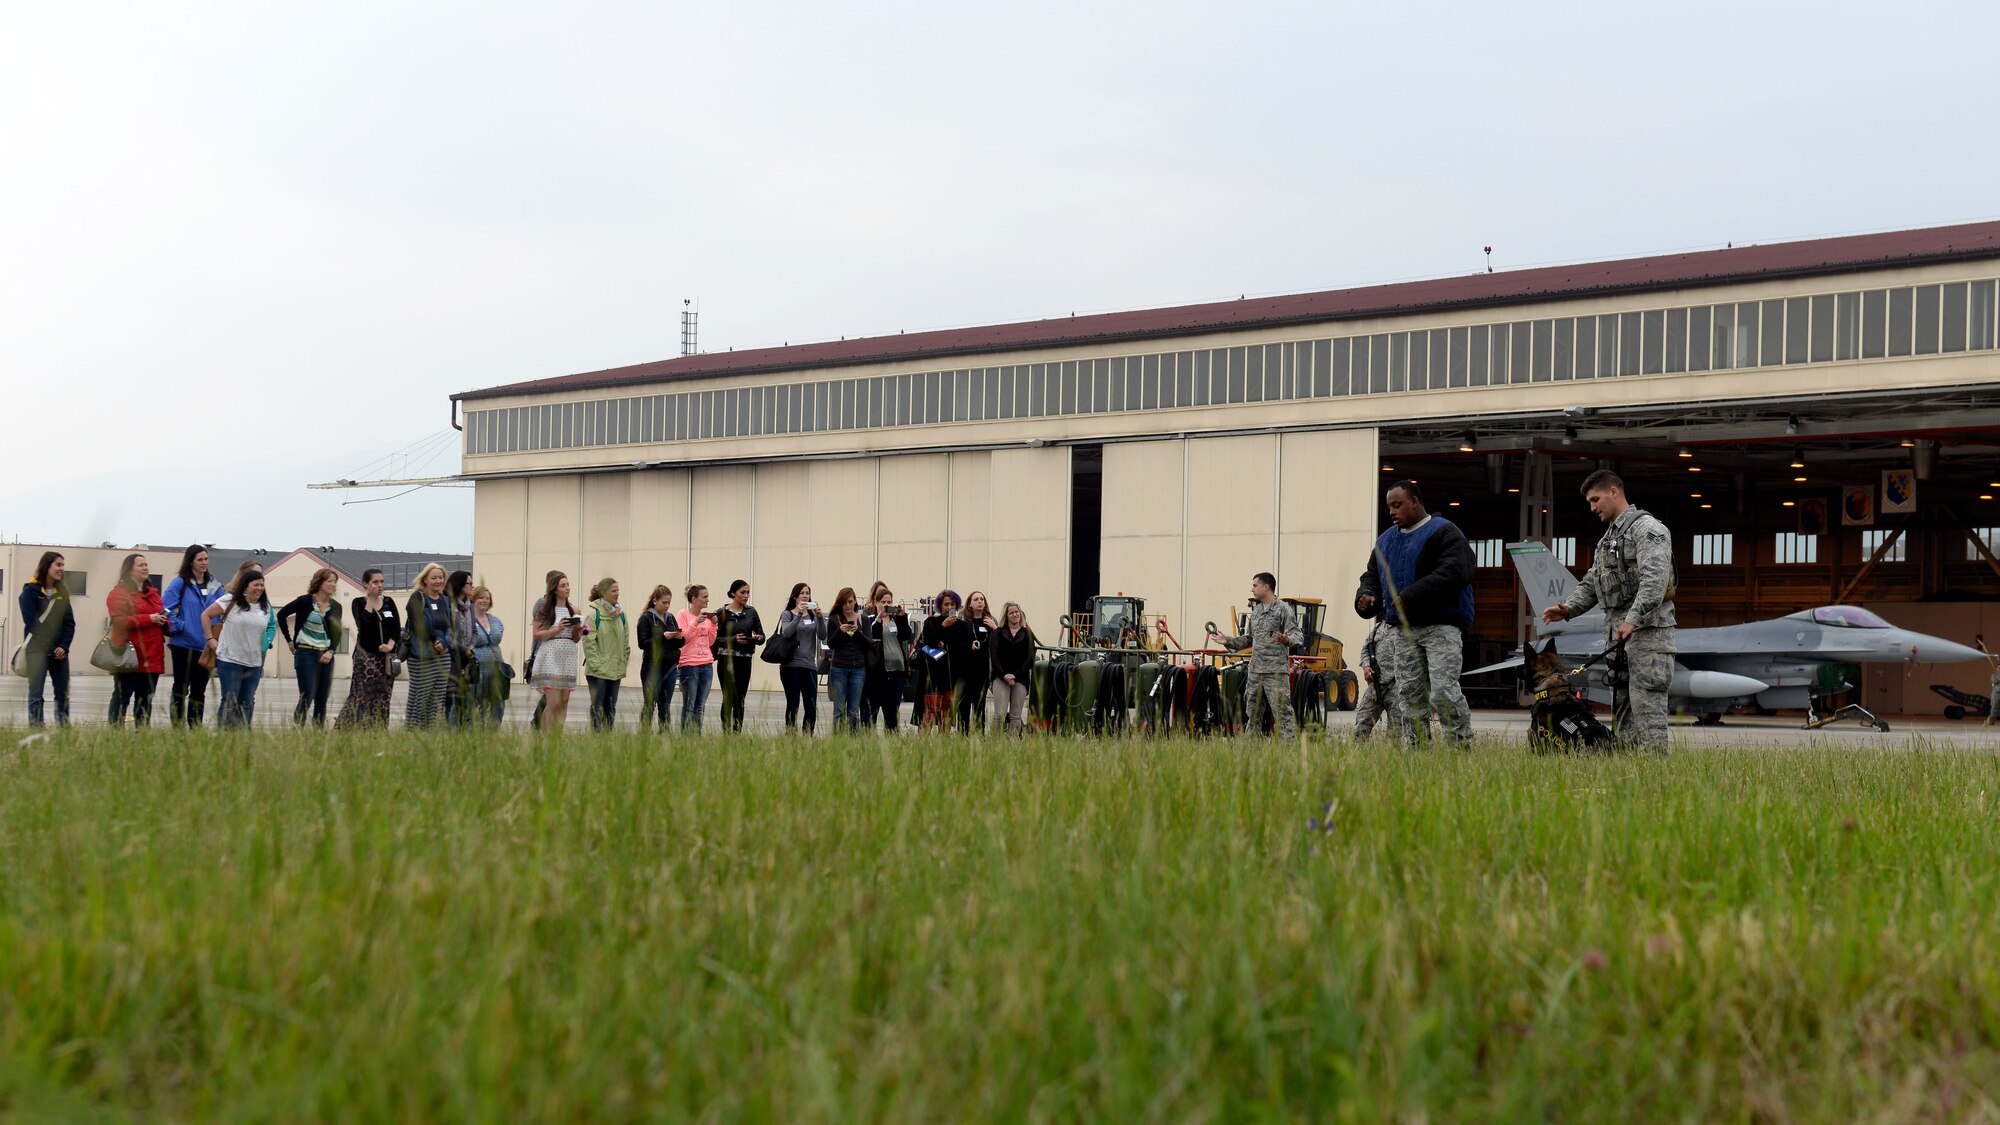 The 31st Security Forces Squadron showcases a military working dog demonstration during the first wing-led Spouses Appreciation Day tour, May 10, 2016, at Aviano Air Base, Italy. The day’s events recognized military and civilian employee spouses and included a tour of several on-base locations. (U.S. Air Force photo by Airman 1st Class Cary Smith/Released)